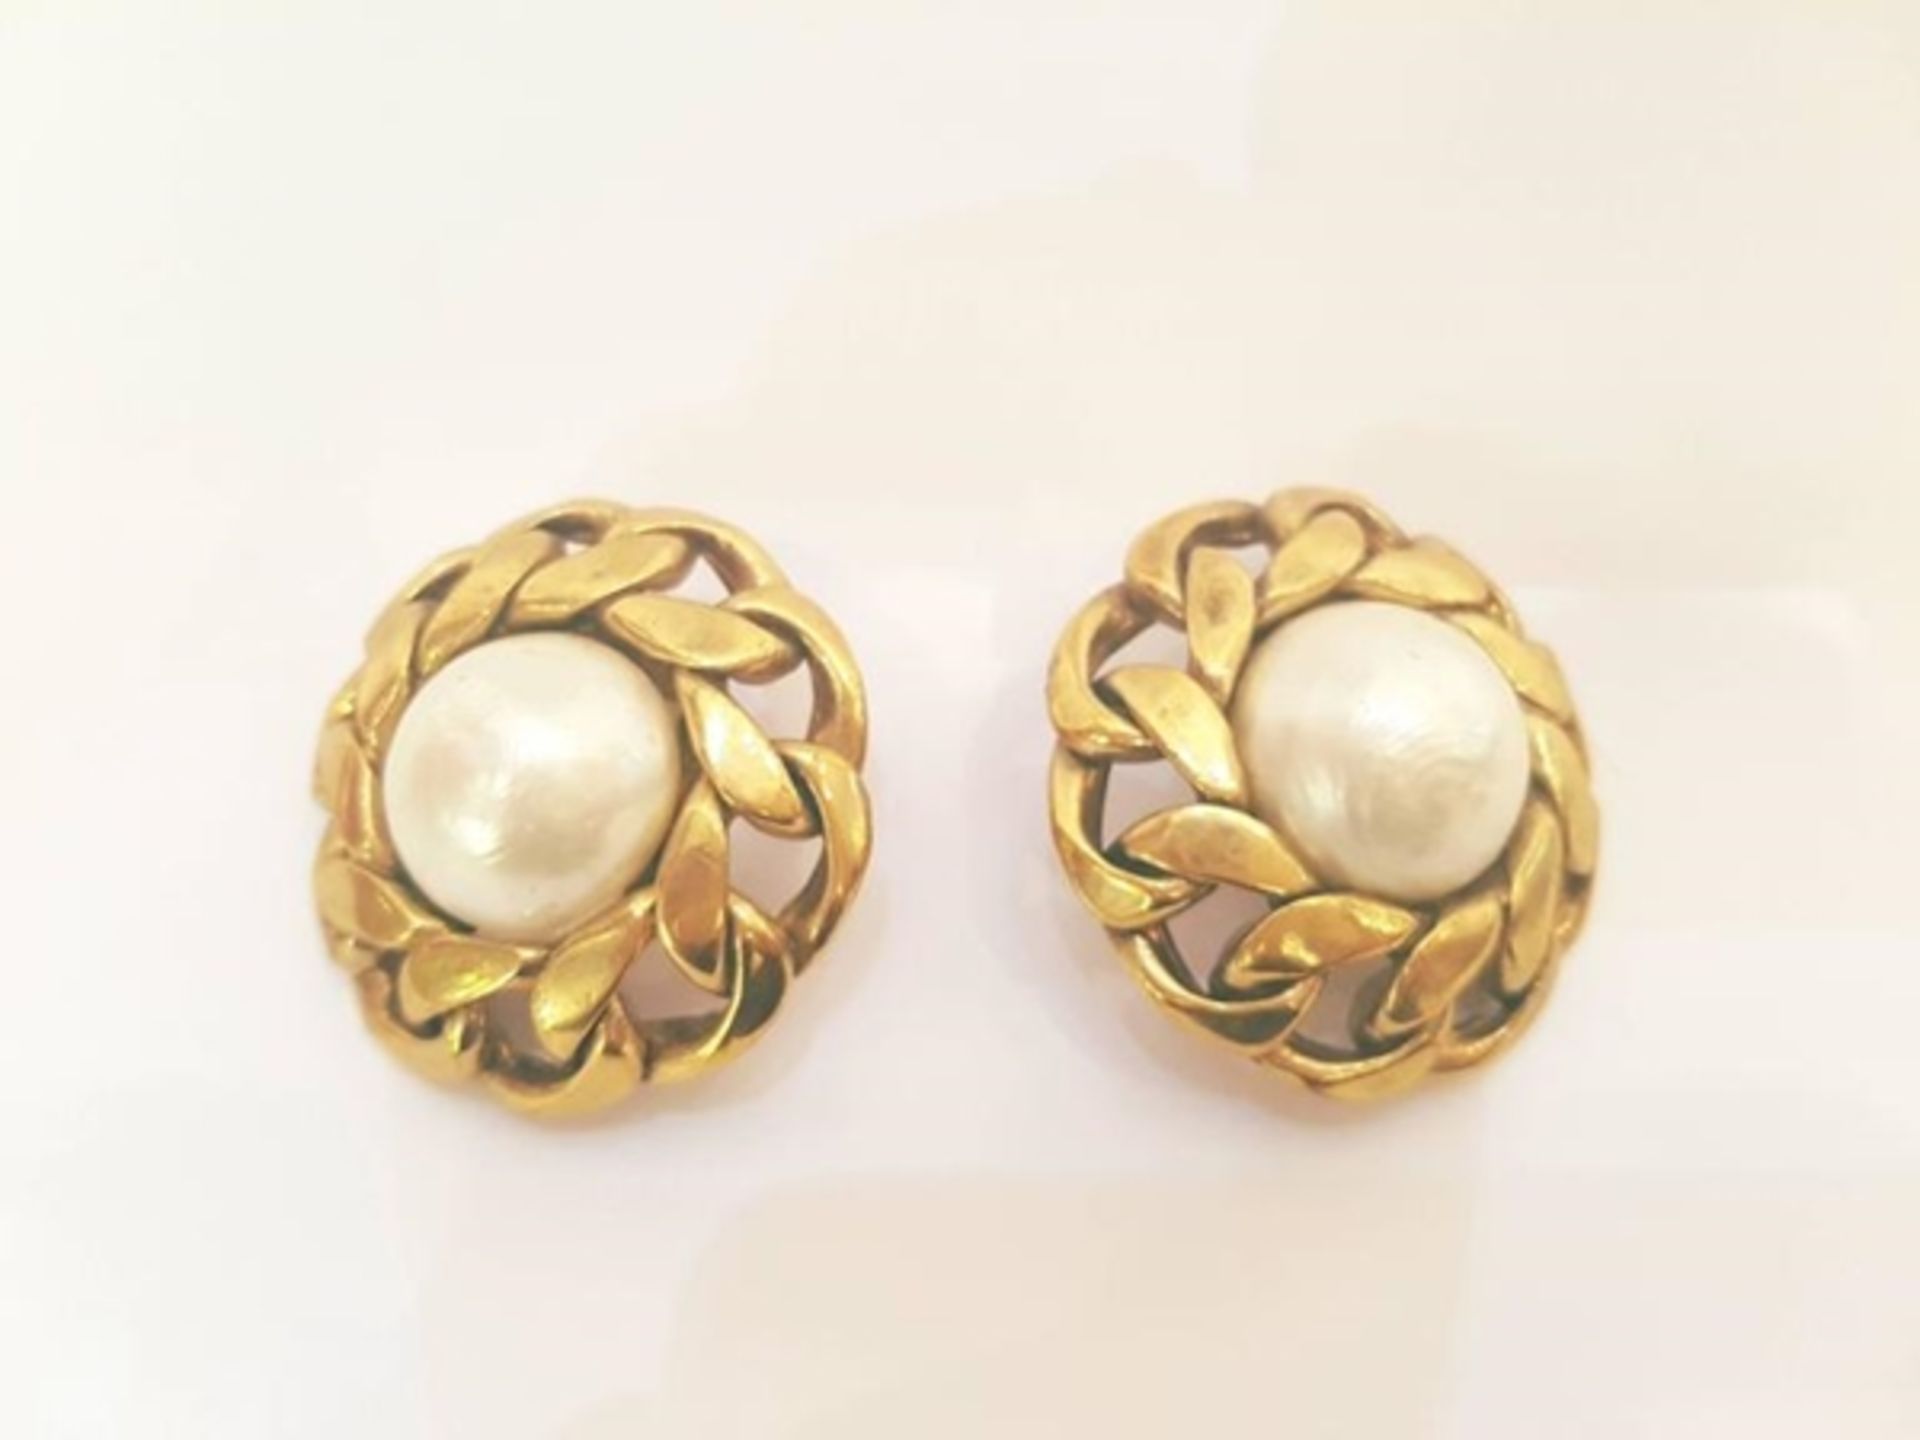 Chanel Faux Pearl Gold Tone Vintage Earrings - Image 2 of 3